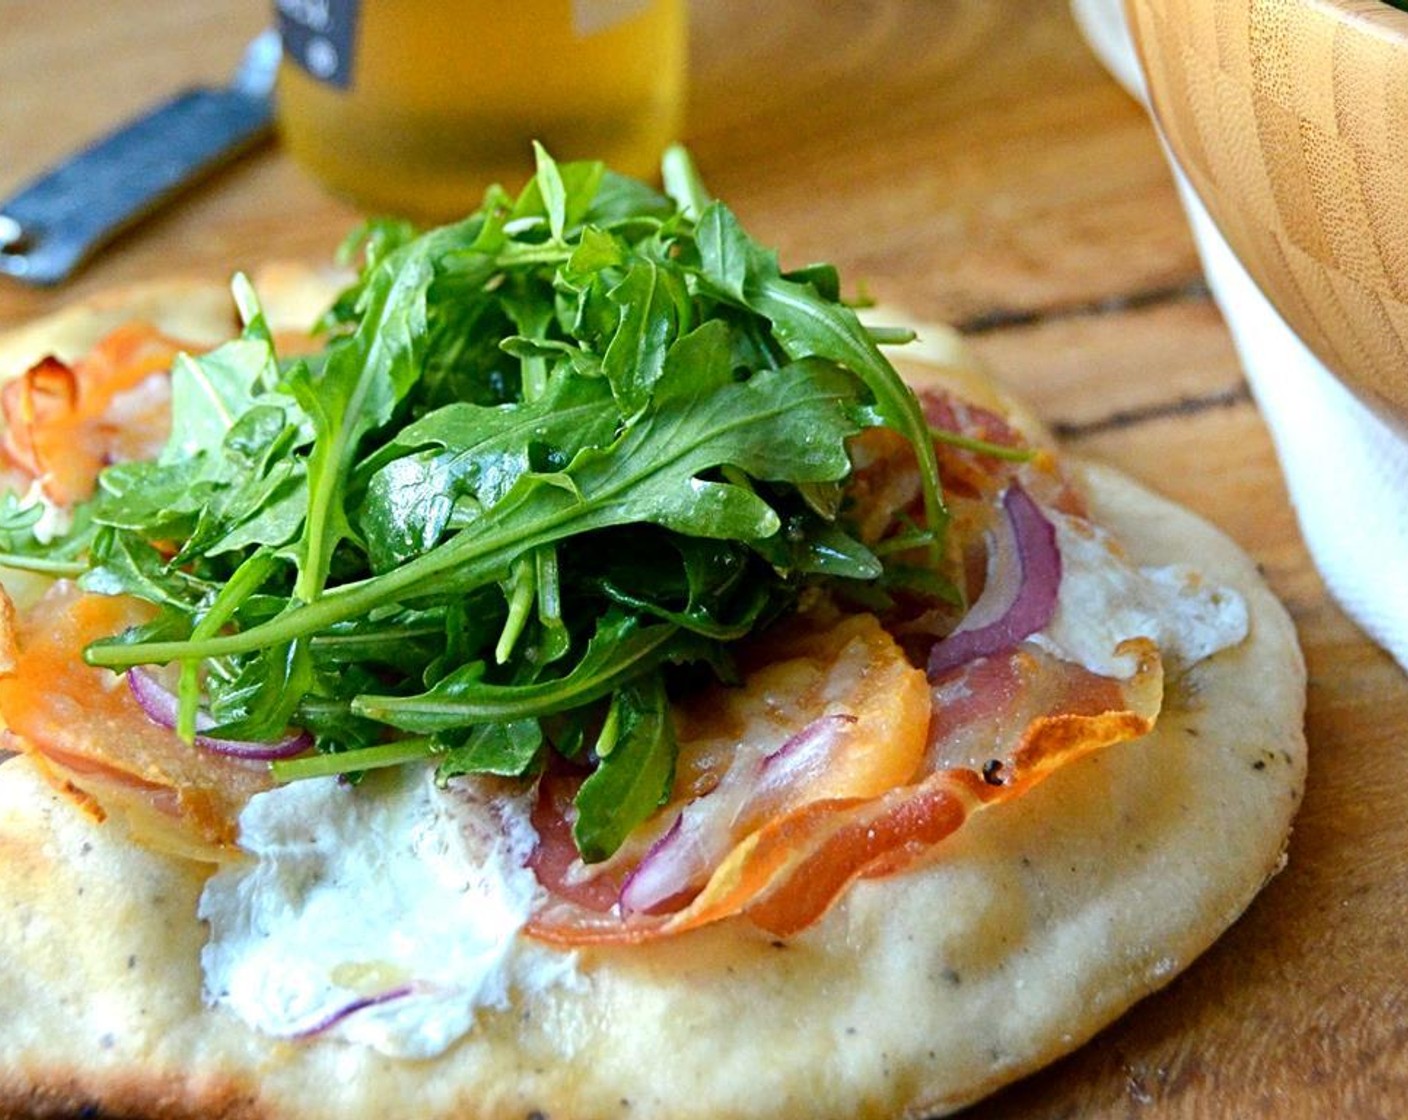 step 20 Add the dressing to the arugula and toss. Serve pizzas individually with a nest of arugula on top, or cut into wedges and top each wedge with greens. Enjoy!